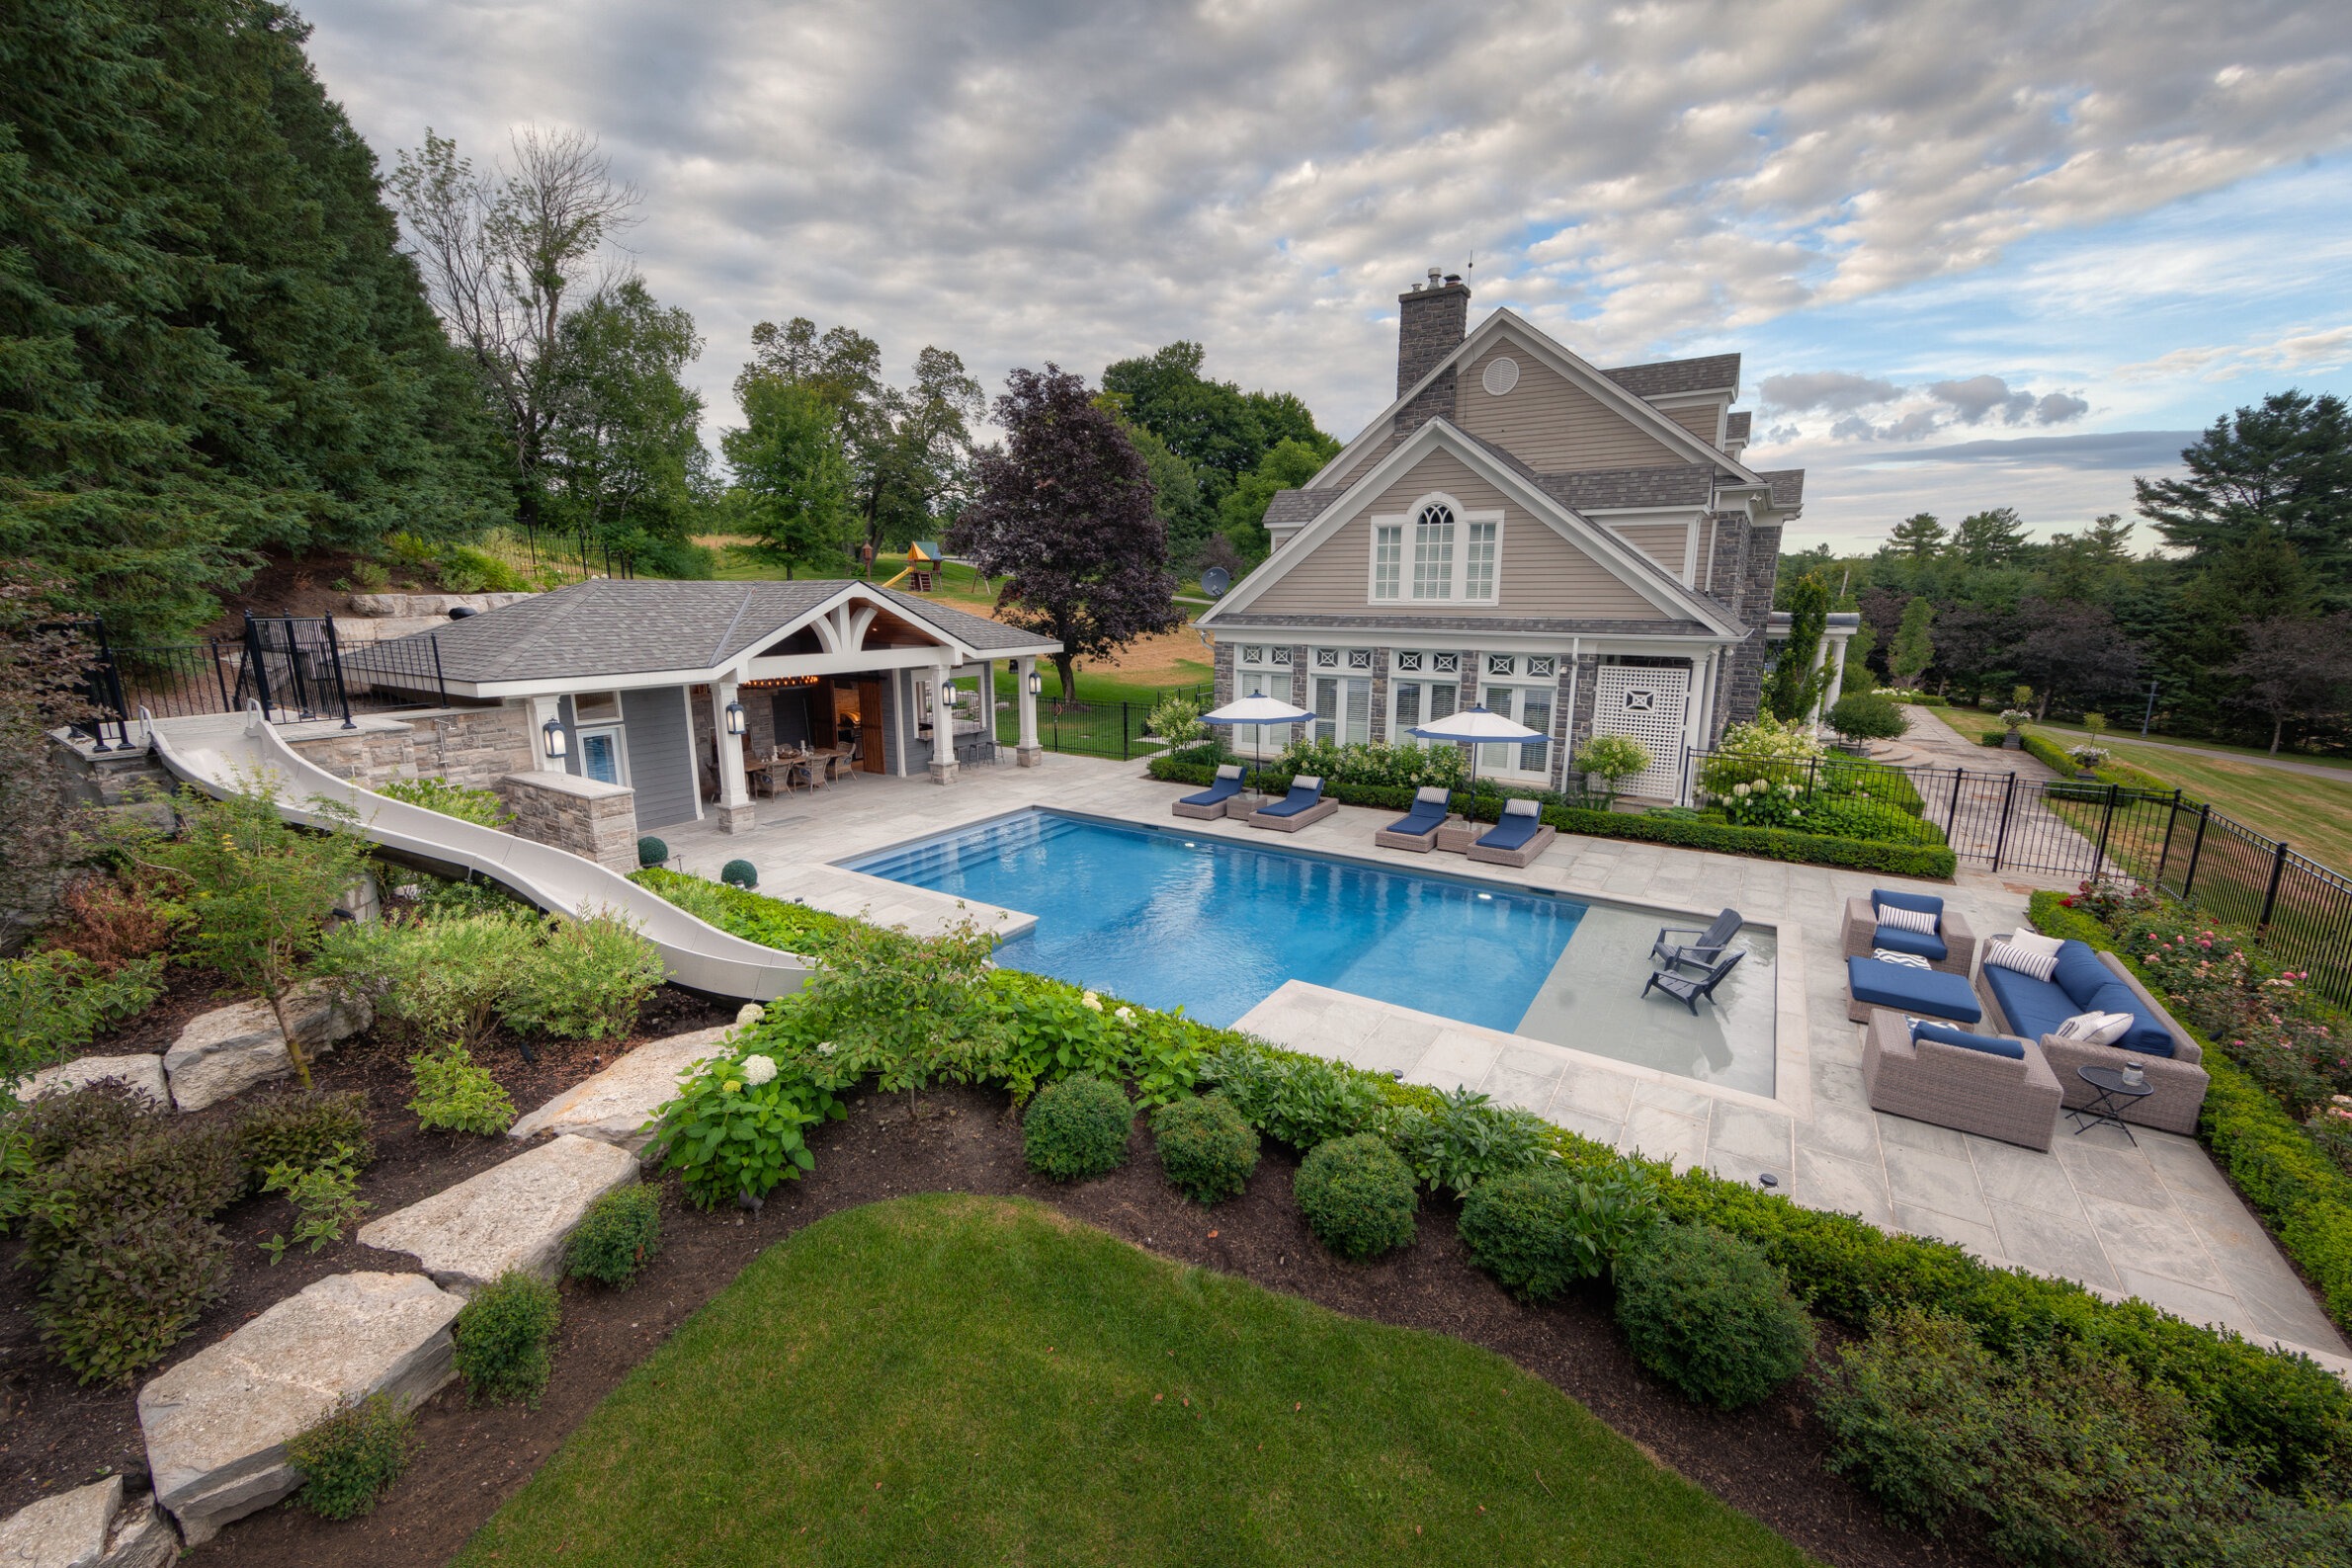 An upscale backyard with a swimming pool, lounge chairs, slide, manicured gardens, pool house, and a spacious two-story home against a cloudy sky.